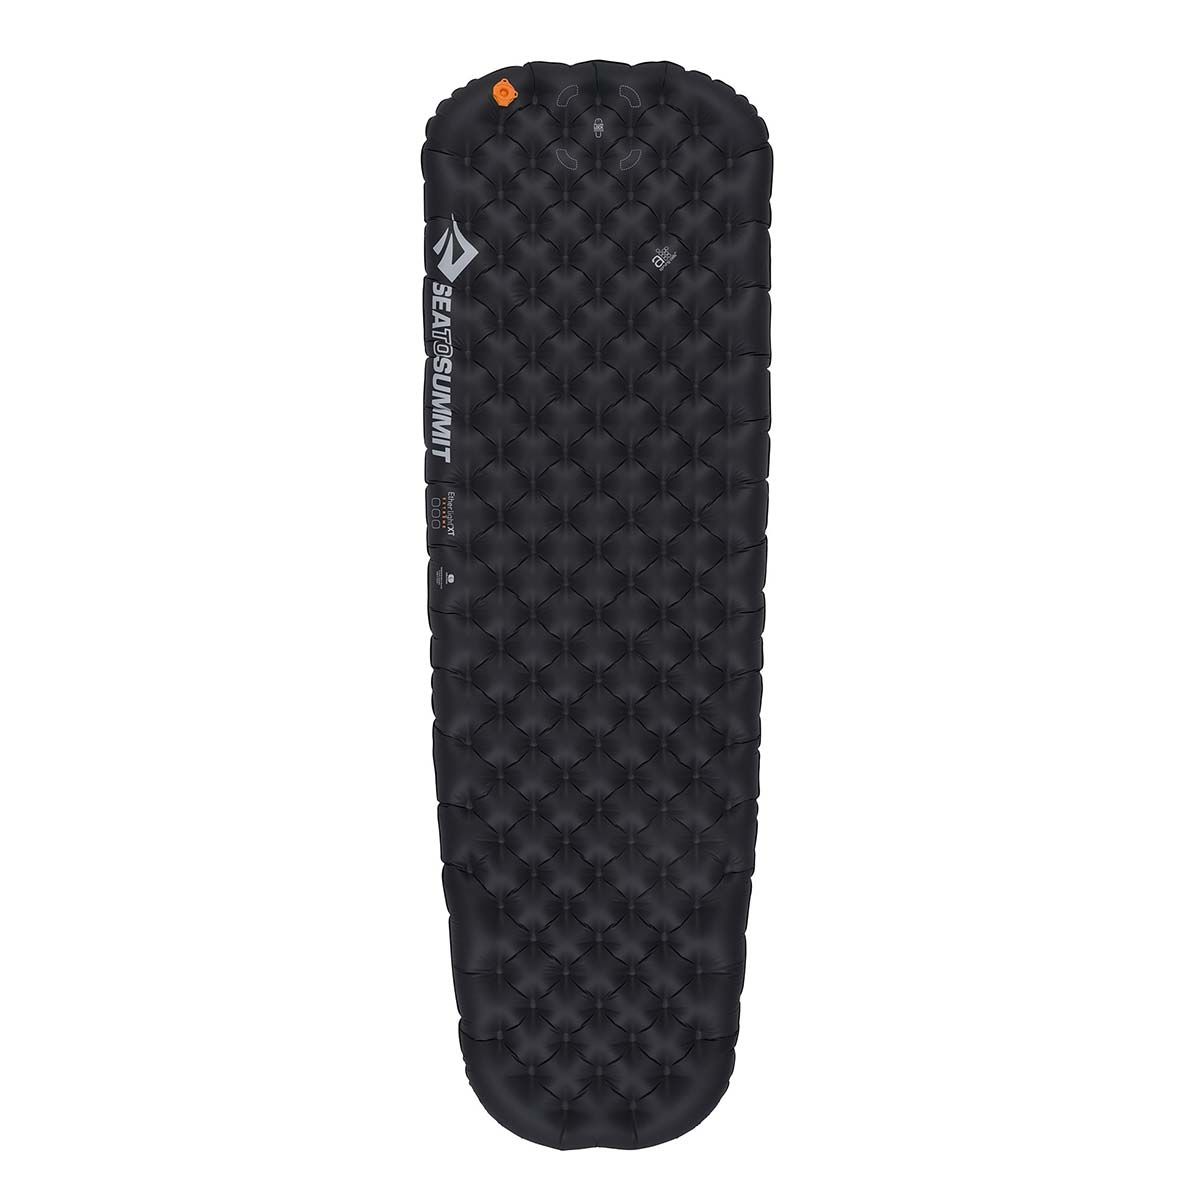 Matelas gonflable Sea to Summit Ether Light XT Extreme - Large